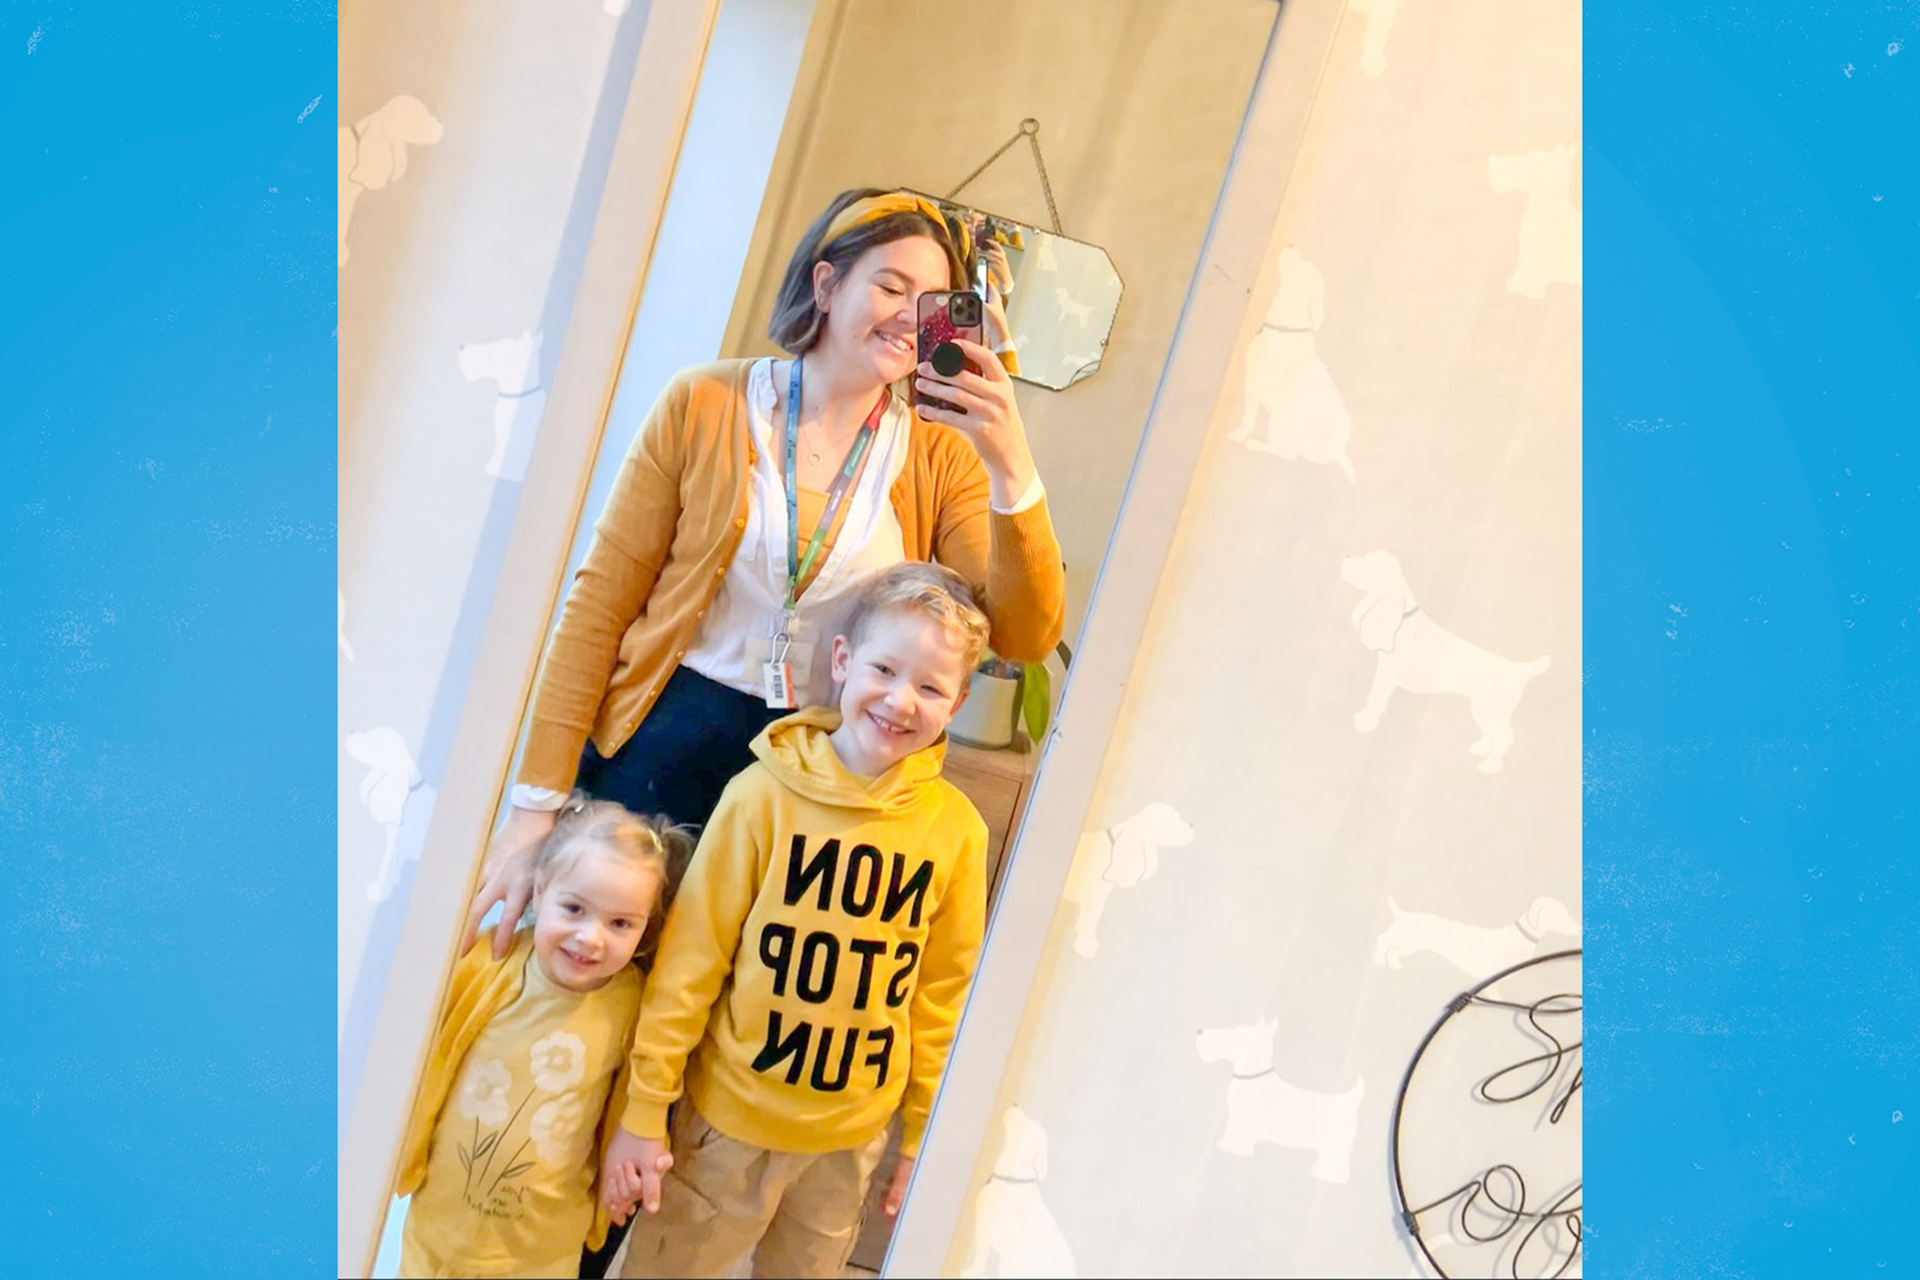 A staff member and two children all wearing yellow and posing for a photo in the mirror.